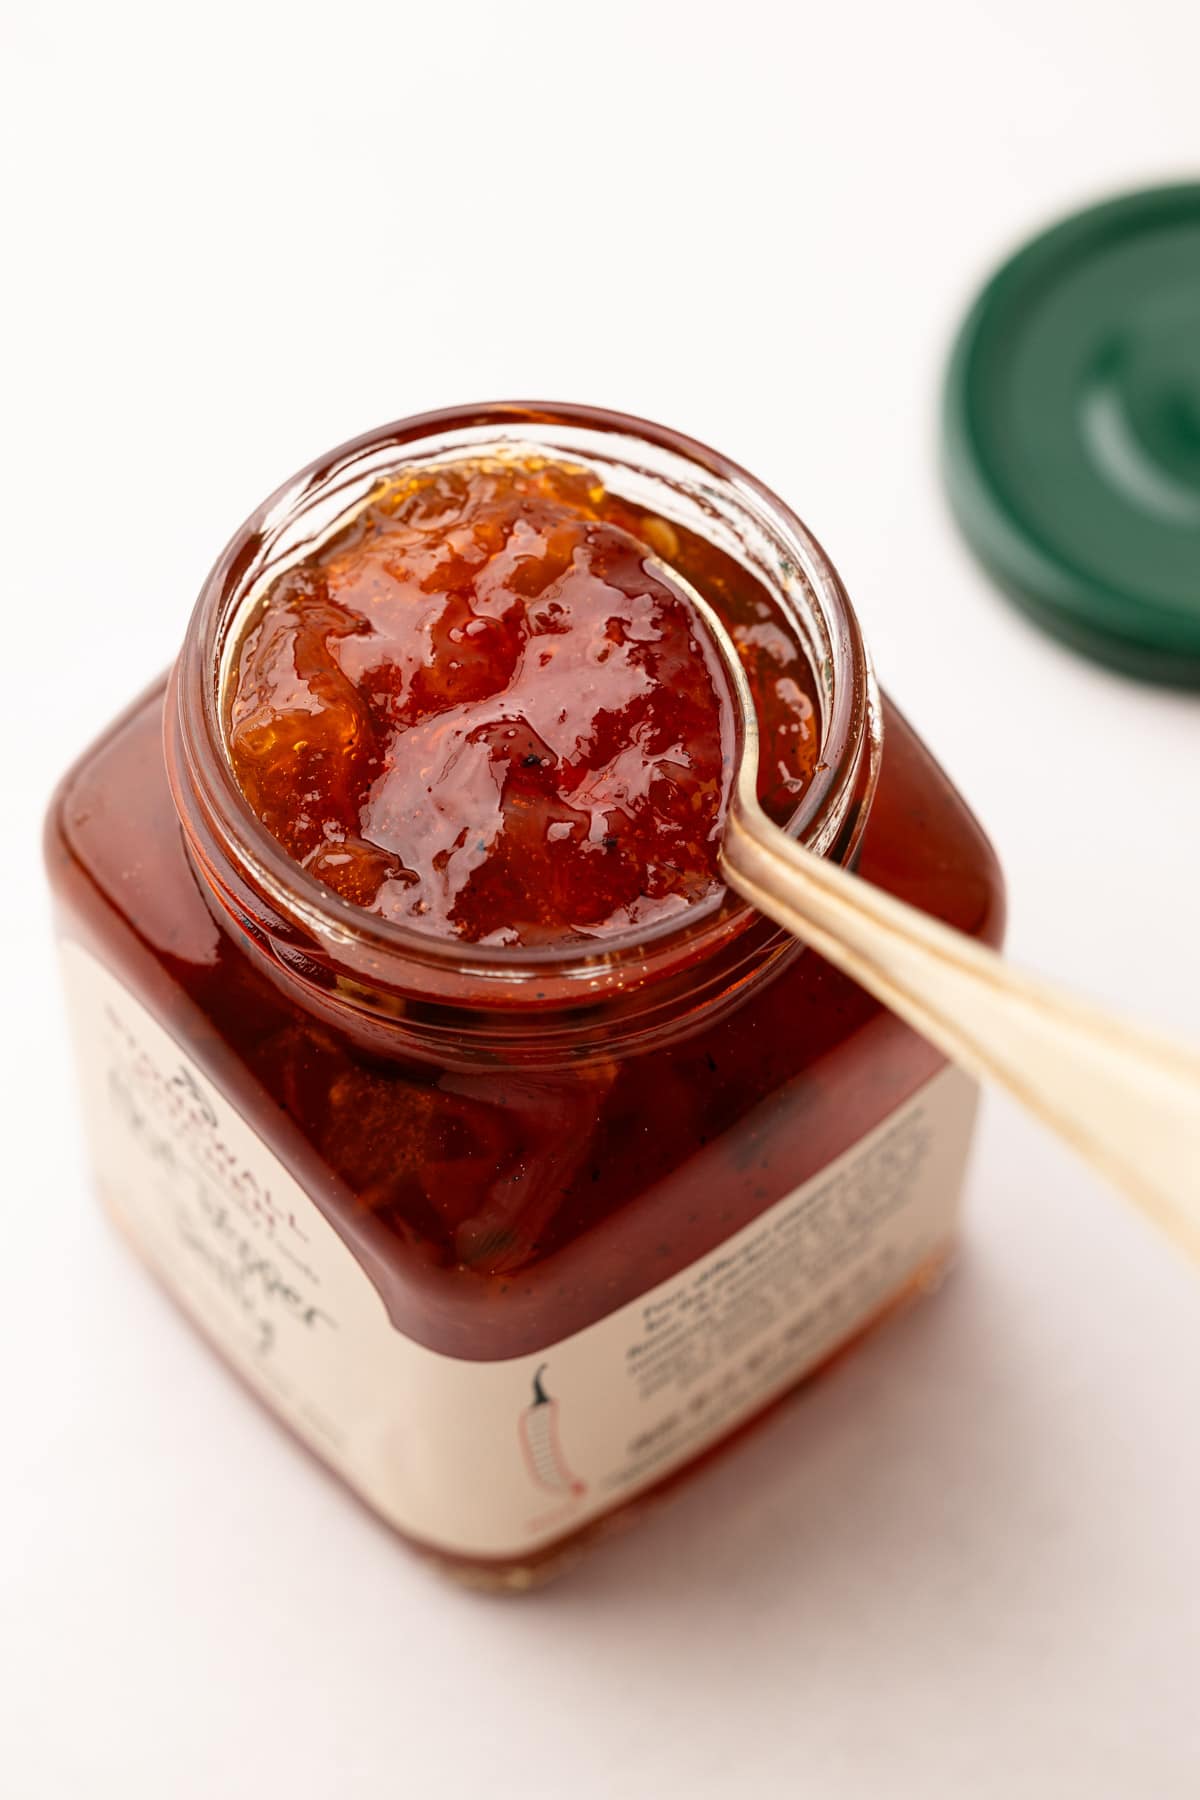 A jar of hot pepper jelly for cream cheese and pepper jelly bites.